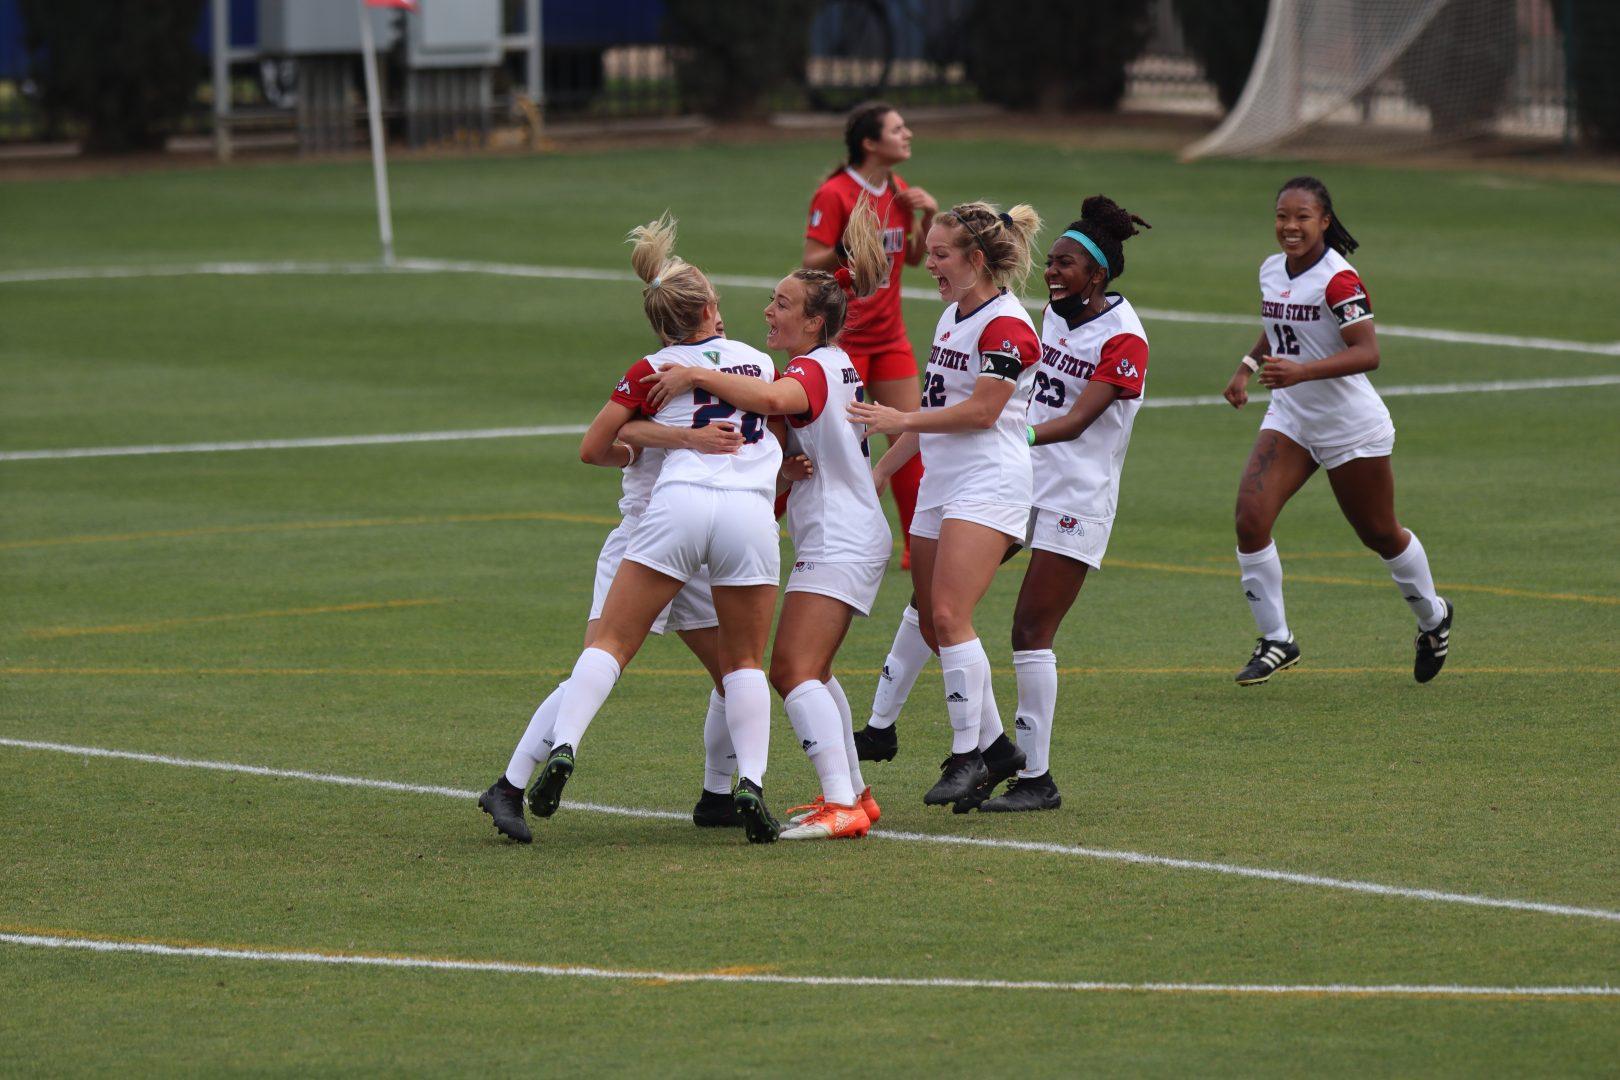 The Bulldogs celebrate after Fresno State defender Bailee Kern scores a goal against UNLV on March 12, 2021, at the Fresno State Soccer Stadium. (Kameron Thorn /The Collegian)